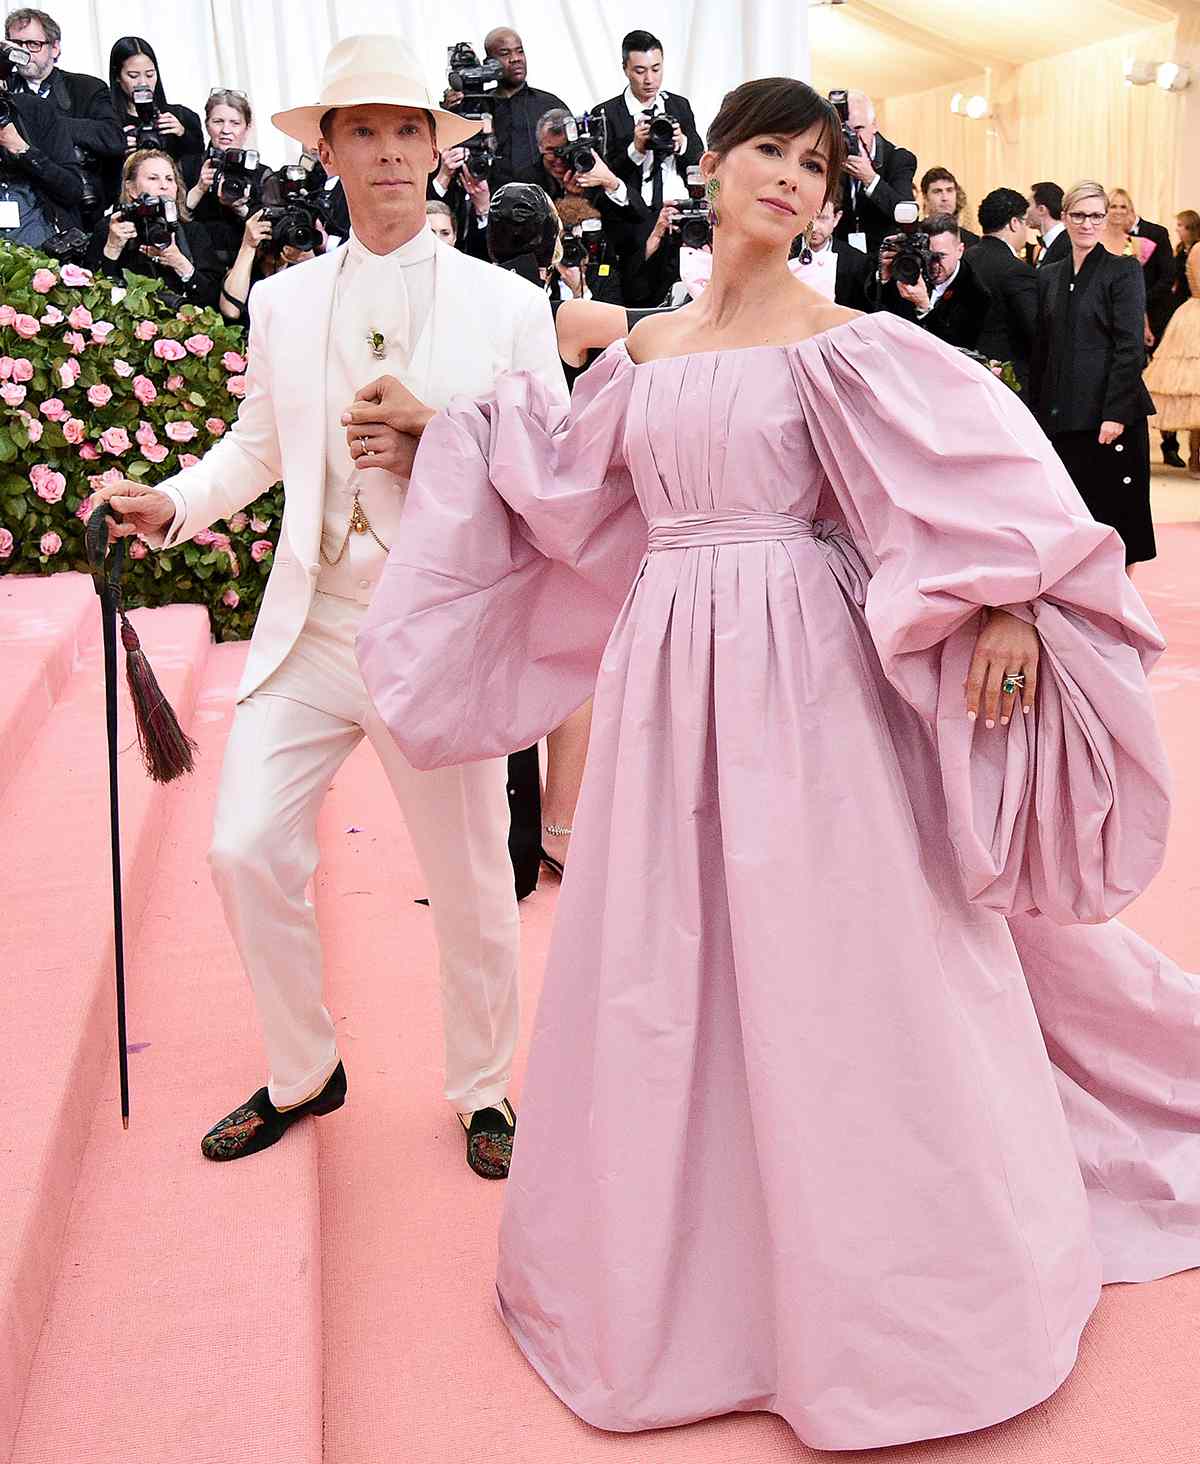 NEW YORK, NEW YORK - MAY 06: Benedict Cumberbatch and Sophie Hunter attend The 2019 Met Gala Celebrating Camp: Notes on Fashion at Metropolitan Museum of Art on May 06, 2019 in New York City. (Photo by Theo Wargo/WireImage)